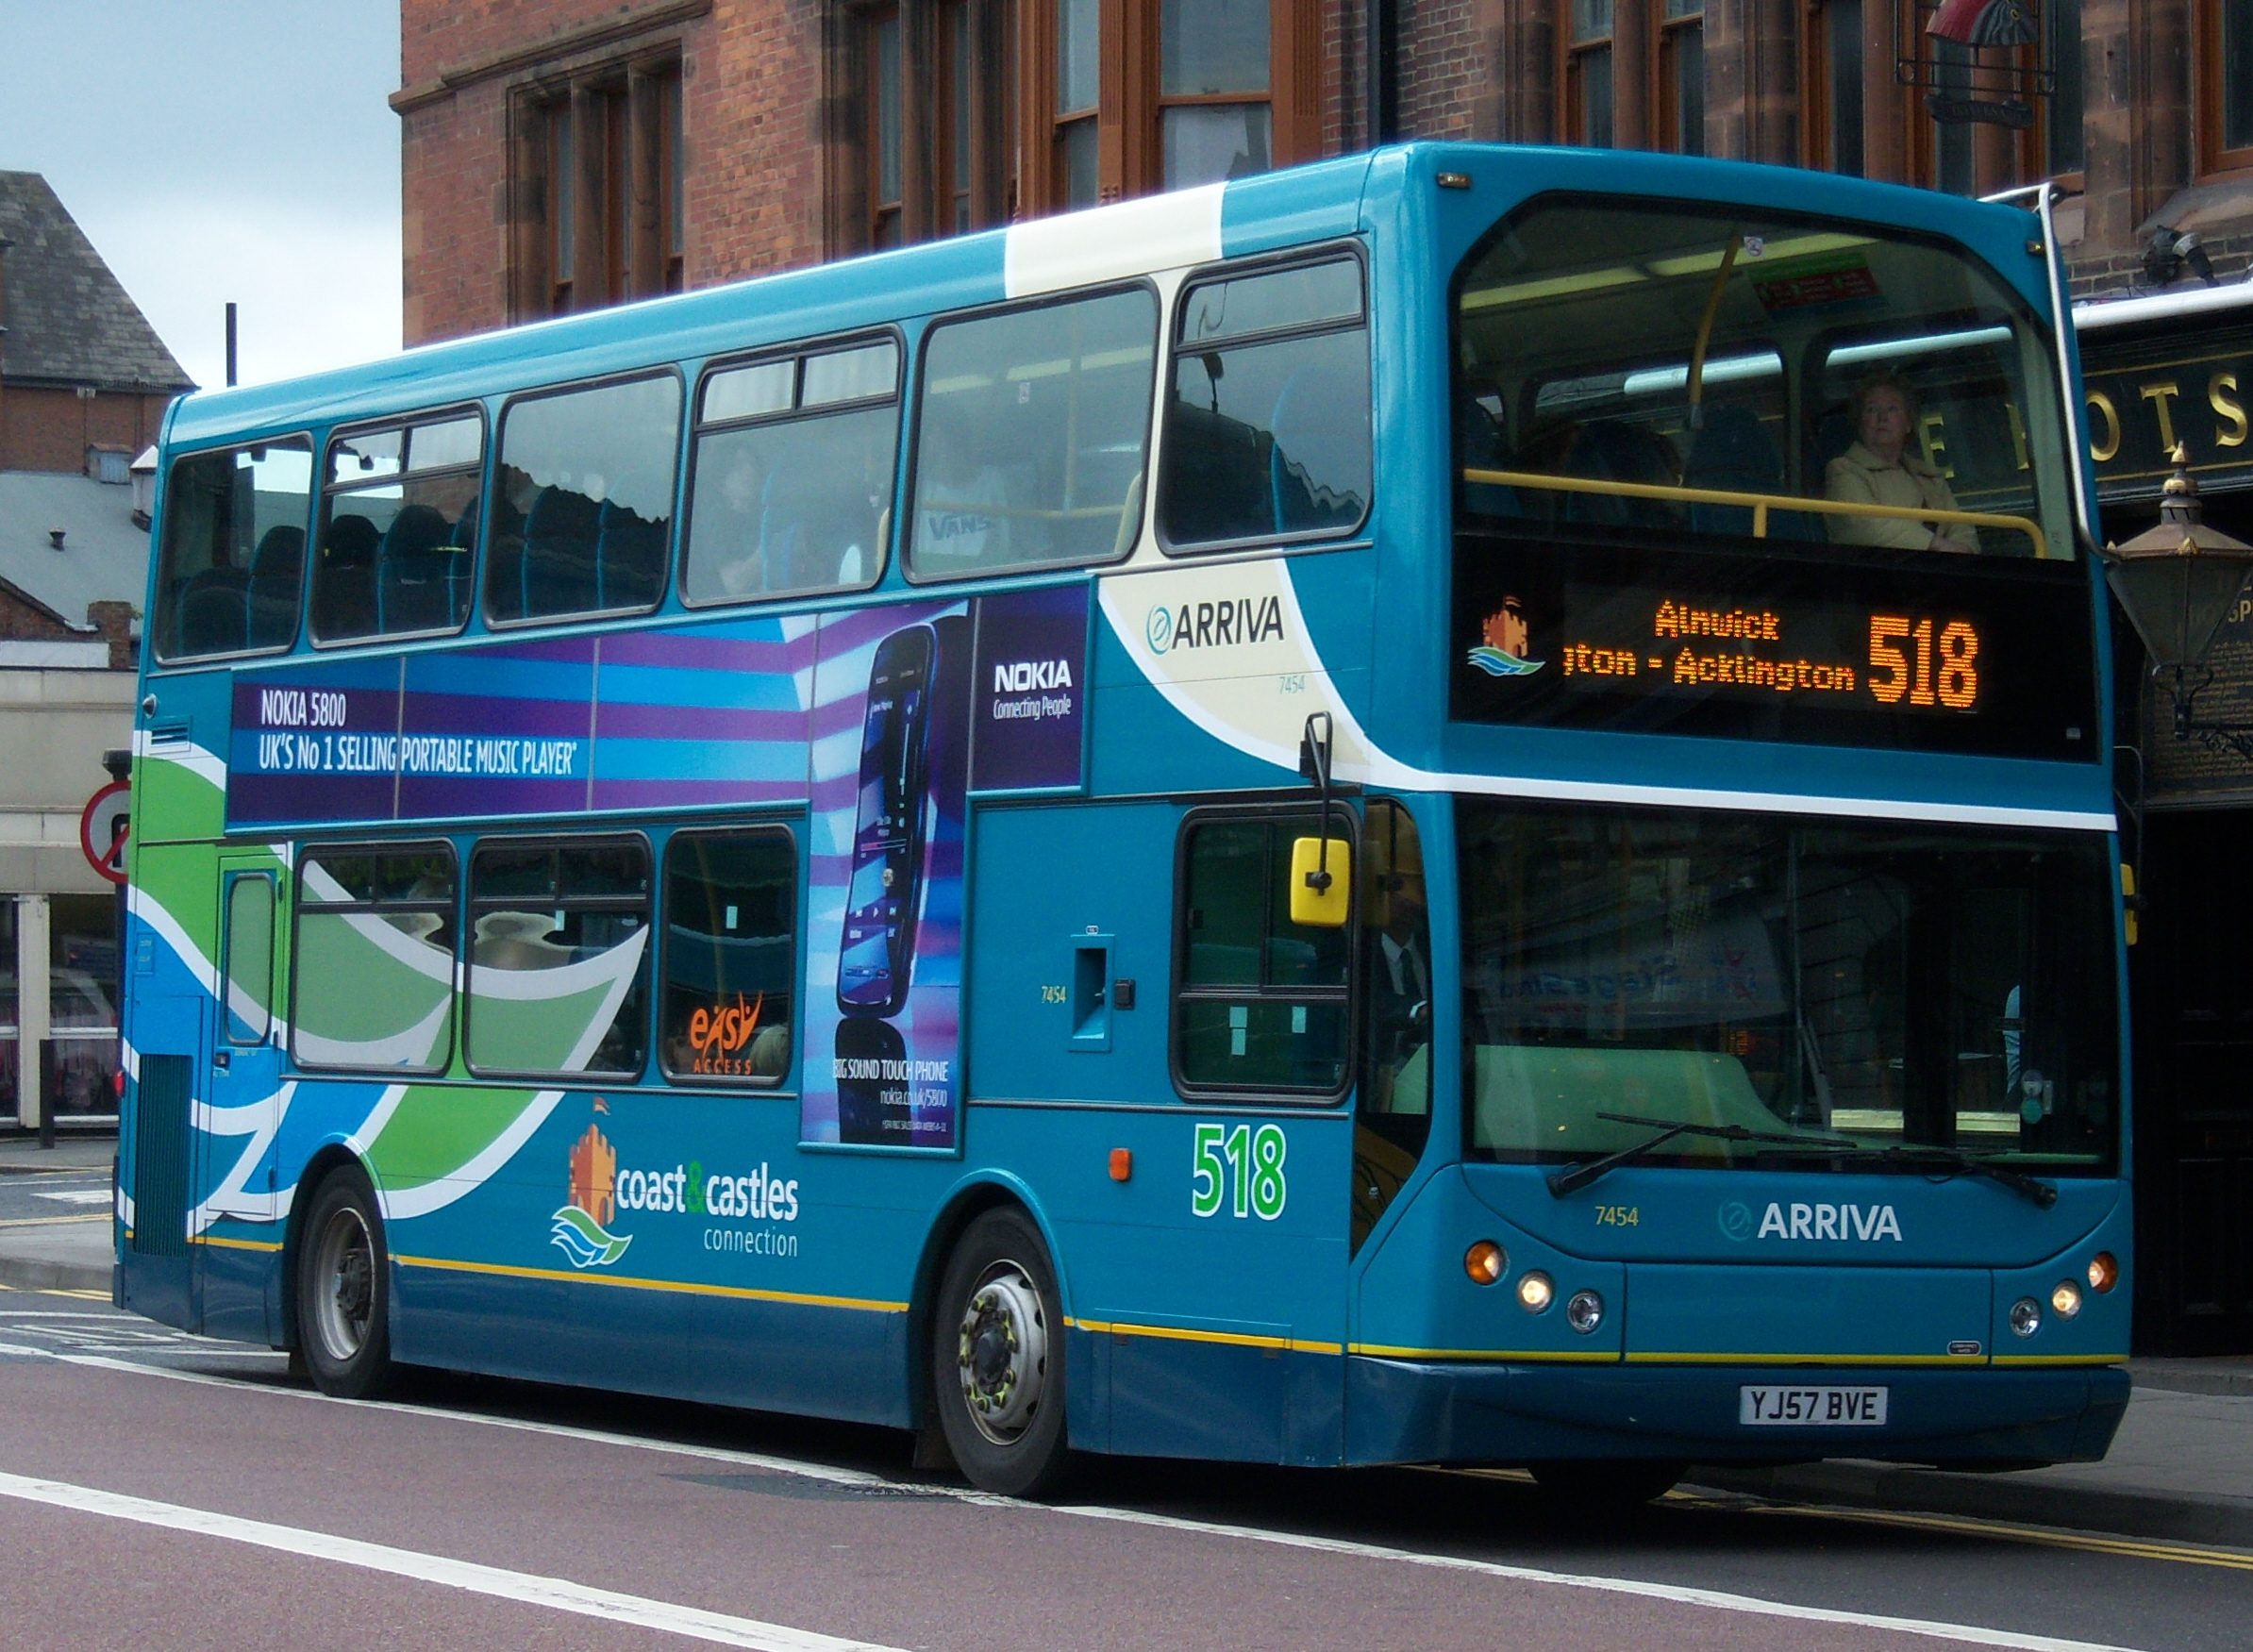 Arriva Looks to the Future with Wi-Fi Buses